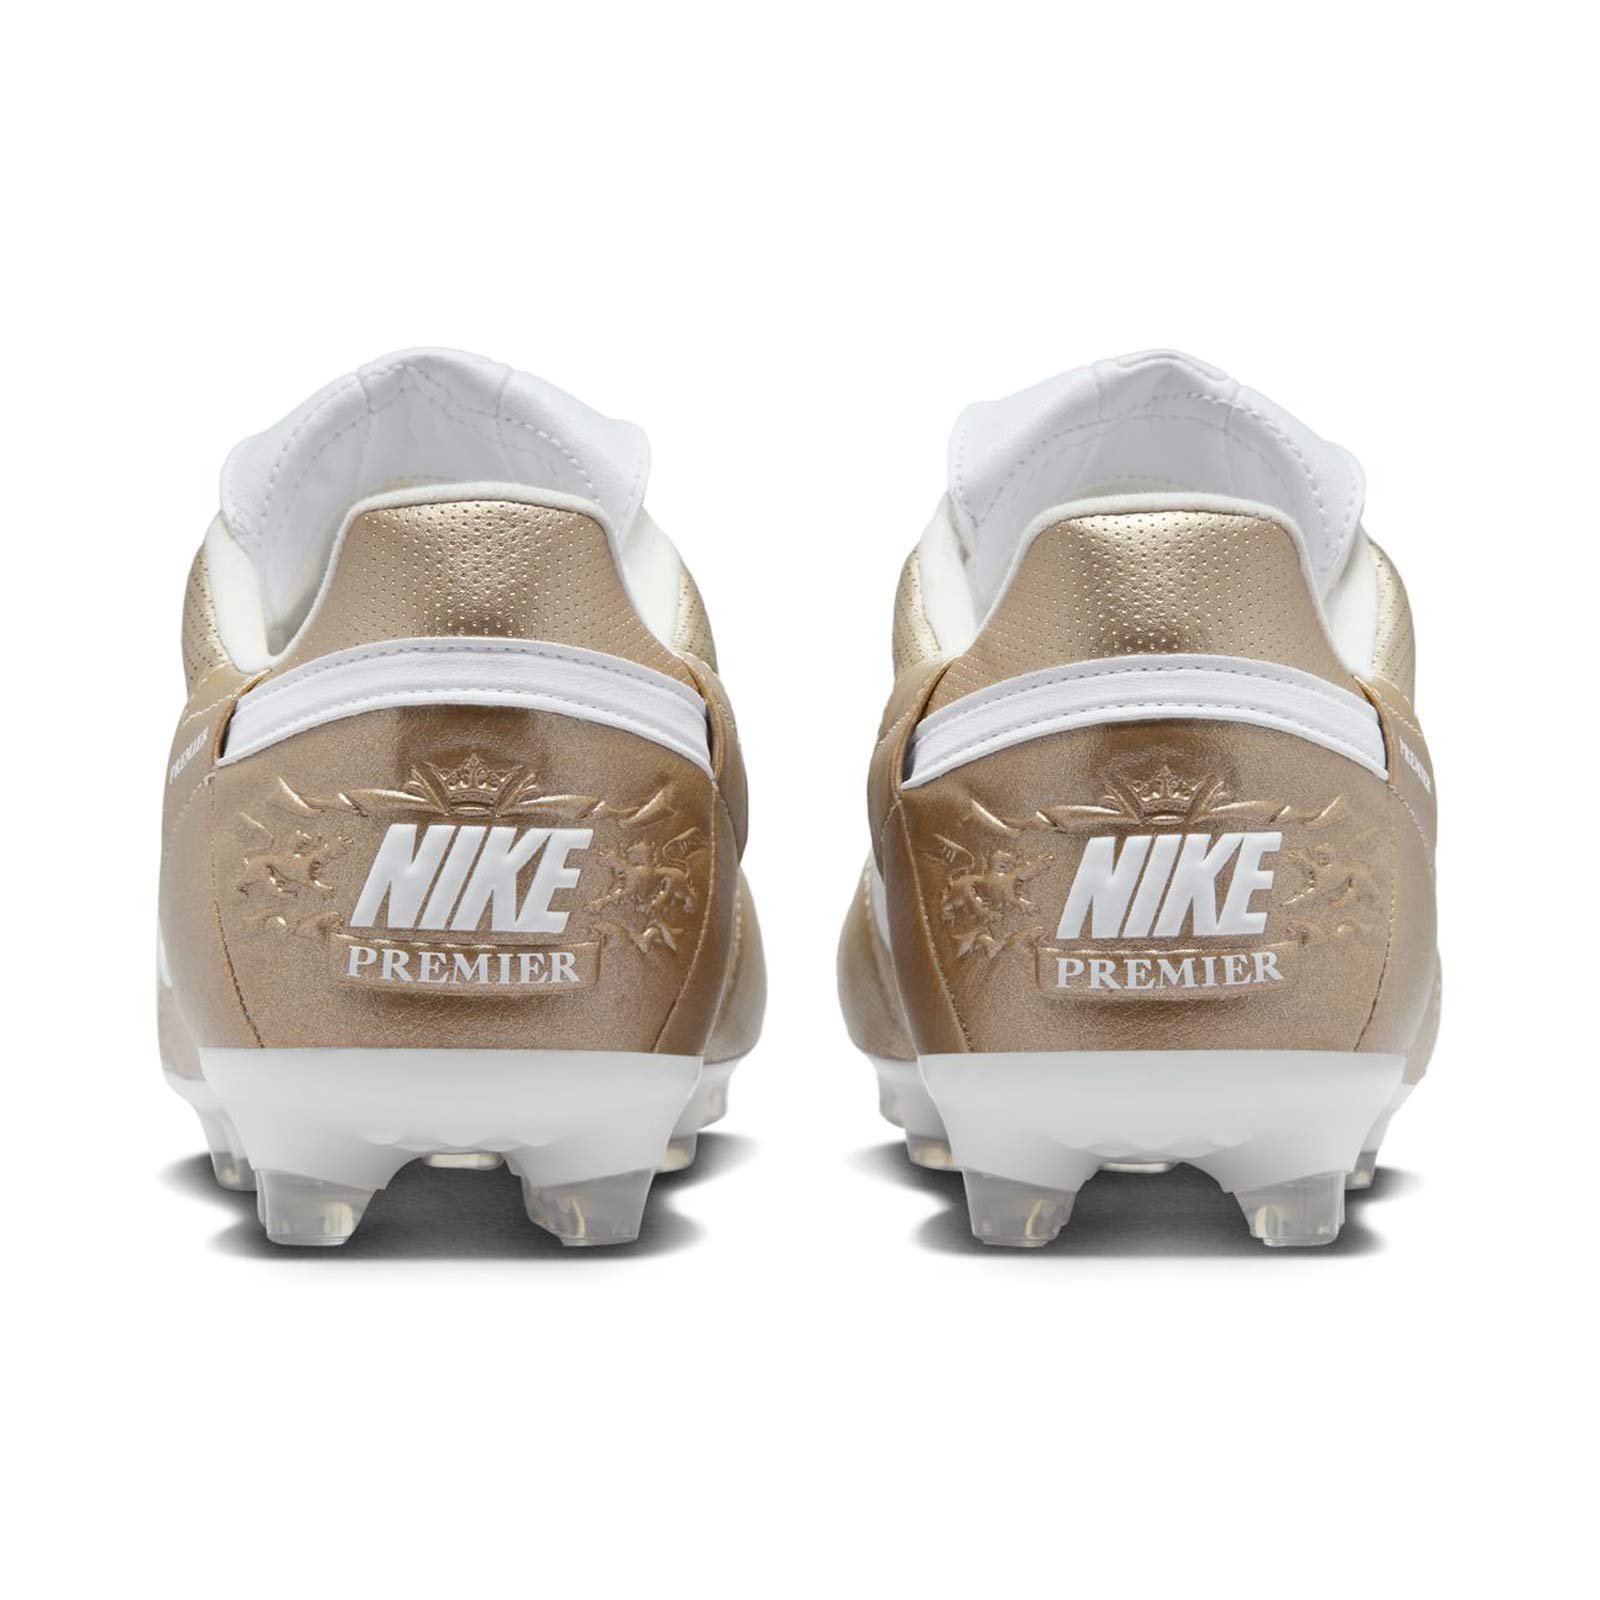 NIKE PREMIER 3 FG FIRM-GROUND FOOTBALL BOOTS